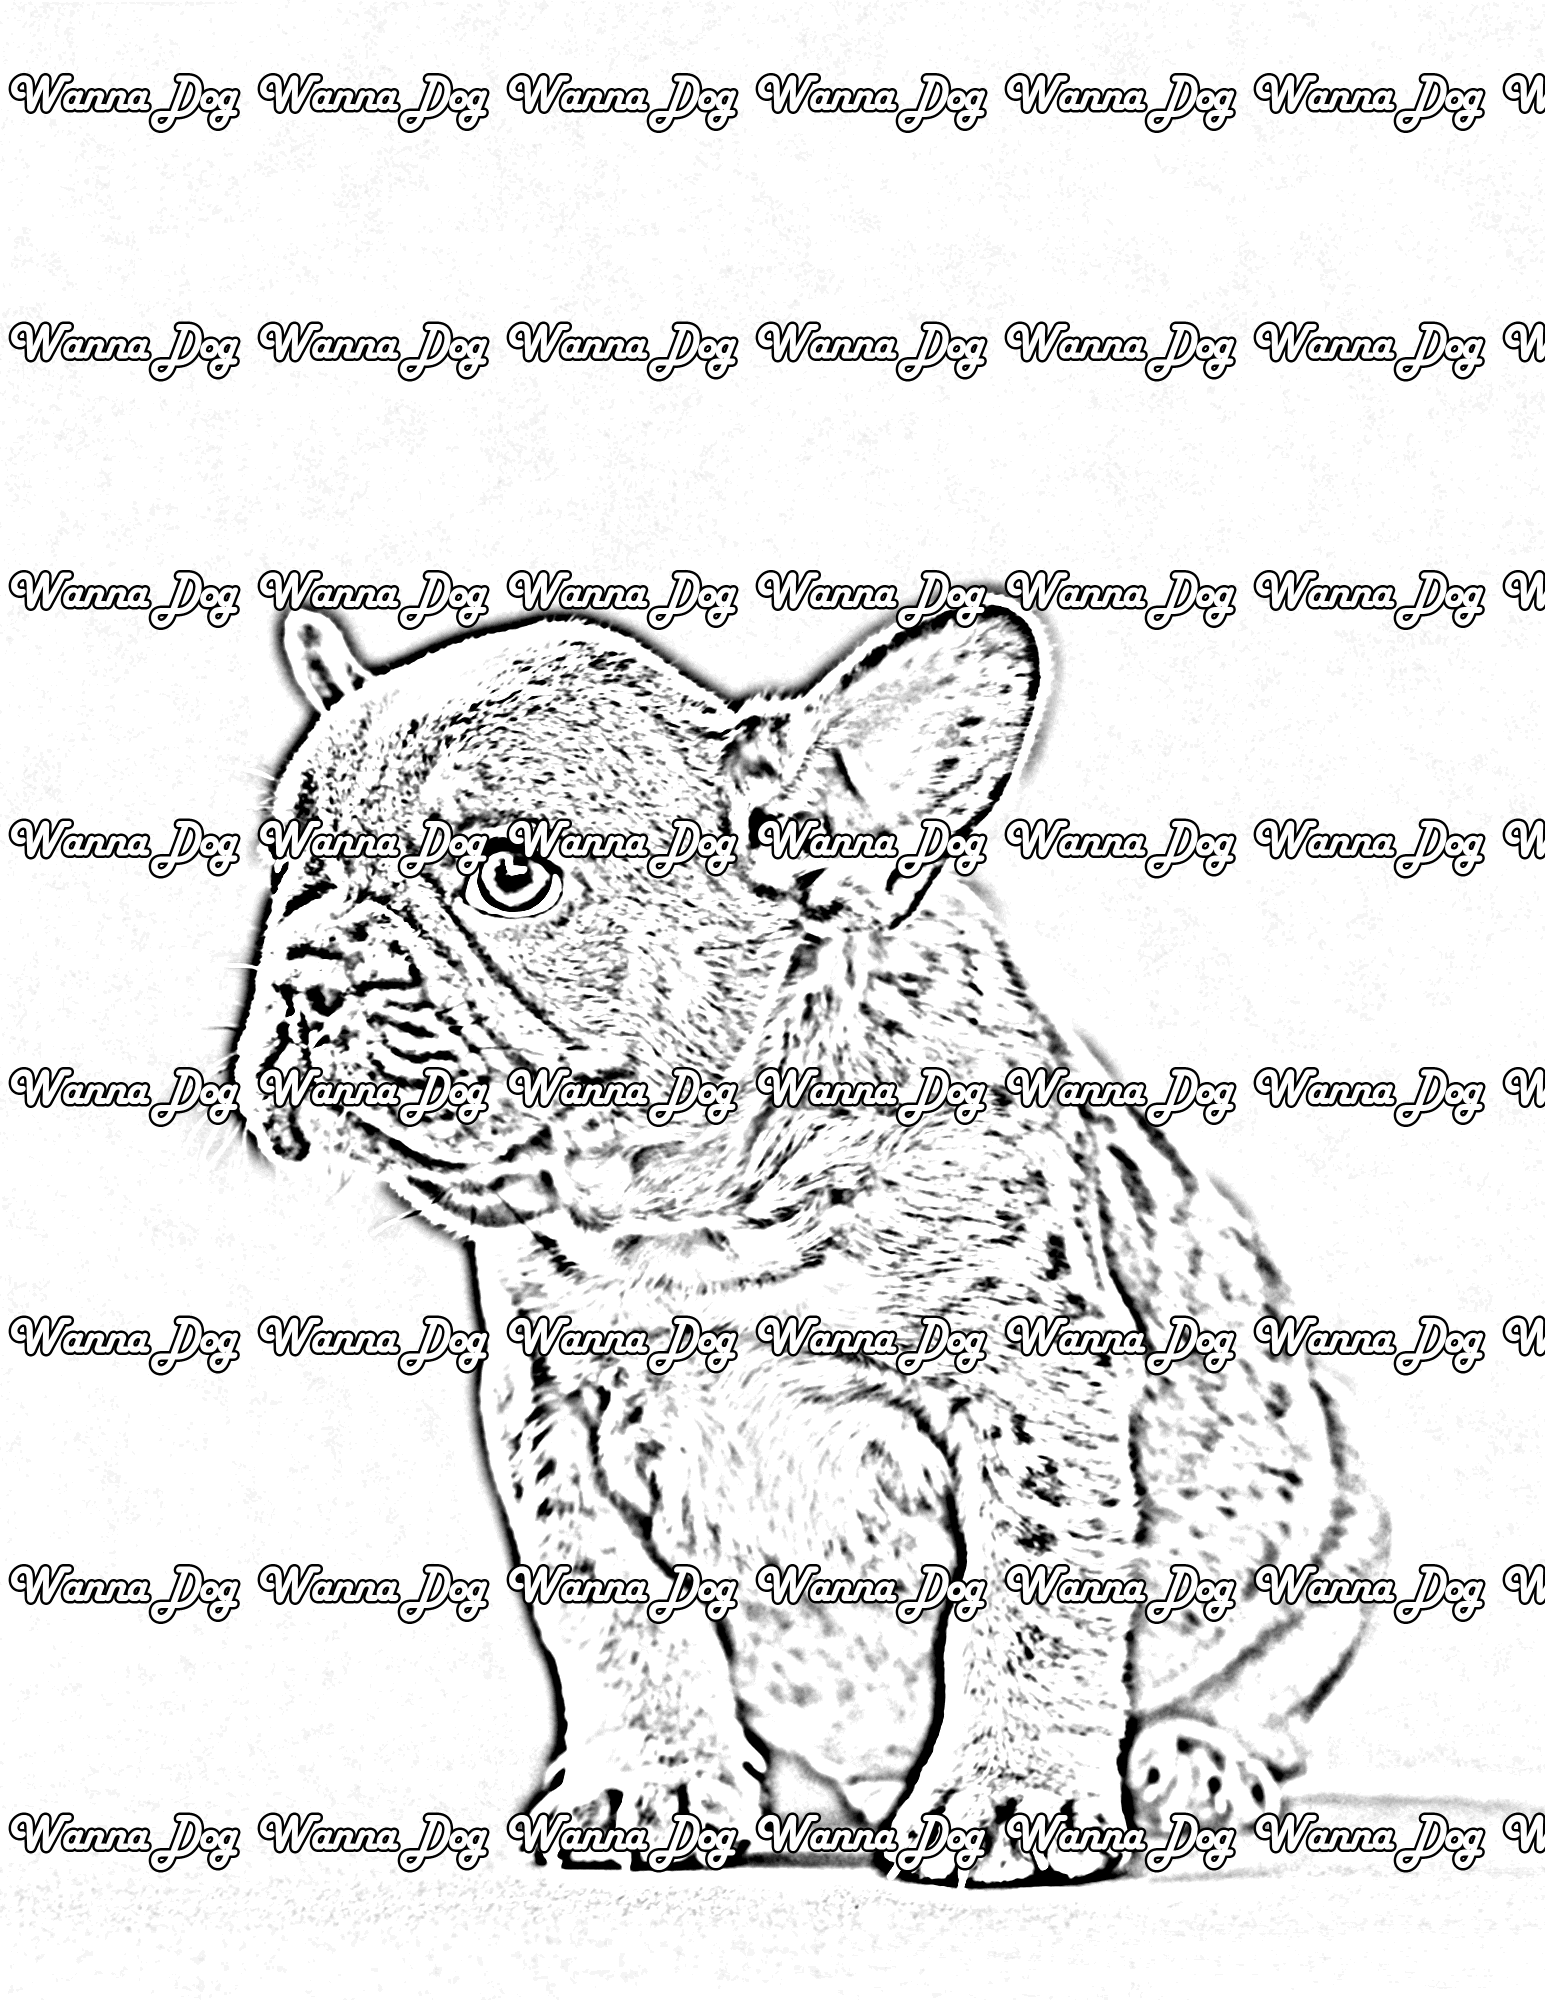 rench Bulldog Puppy Coloring Page of a French Bulldog Puppy looking away from the camera